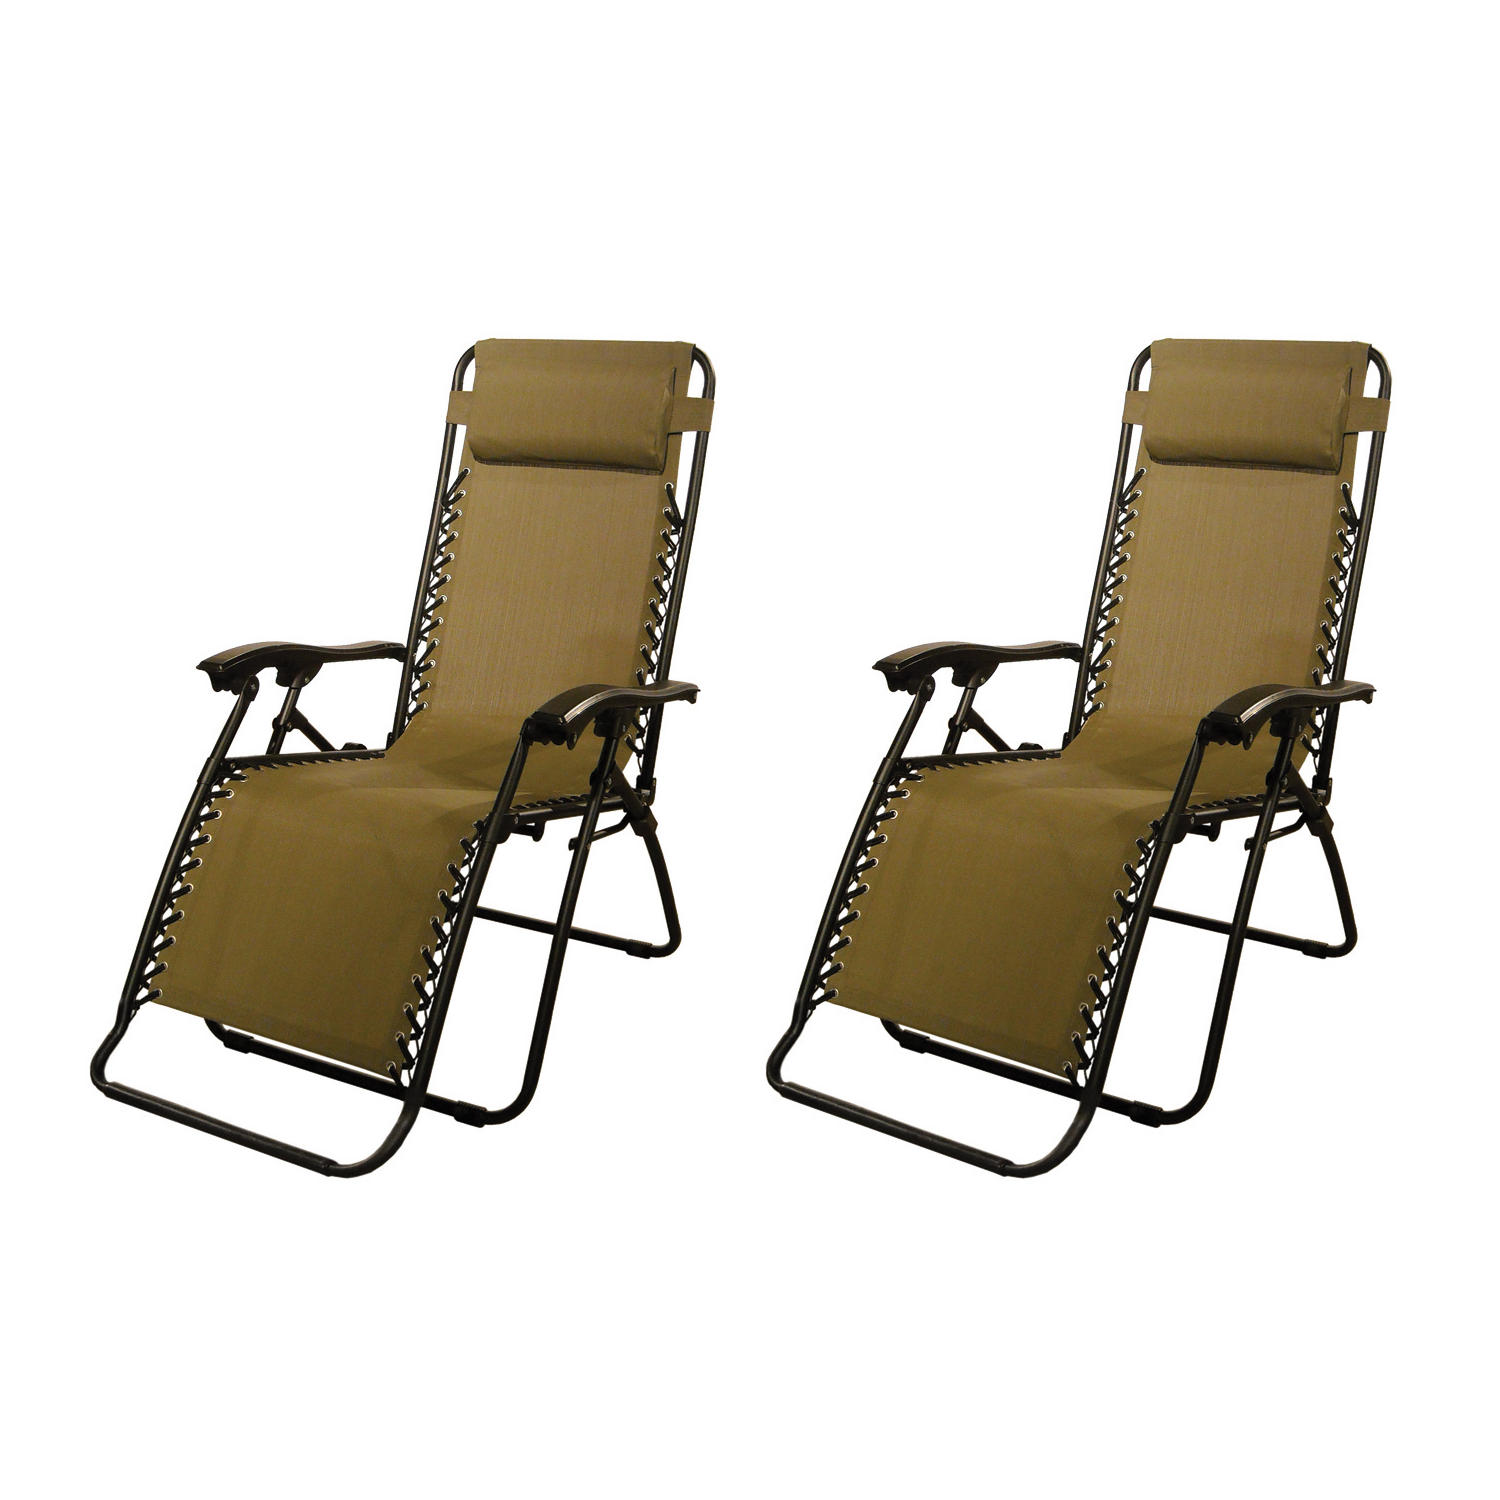 Set of 2 : Zero Gravity Chairs Case Lounge Patio Chairs